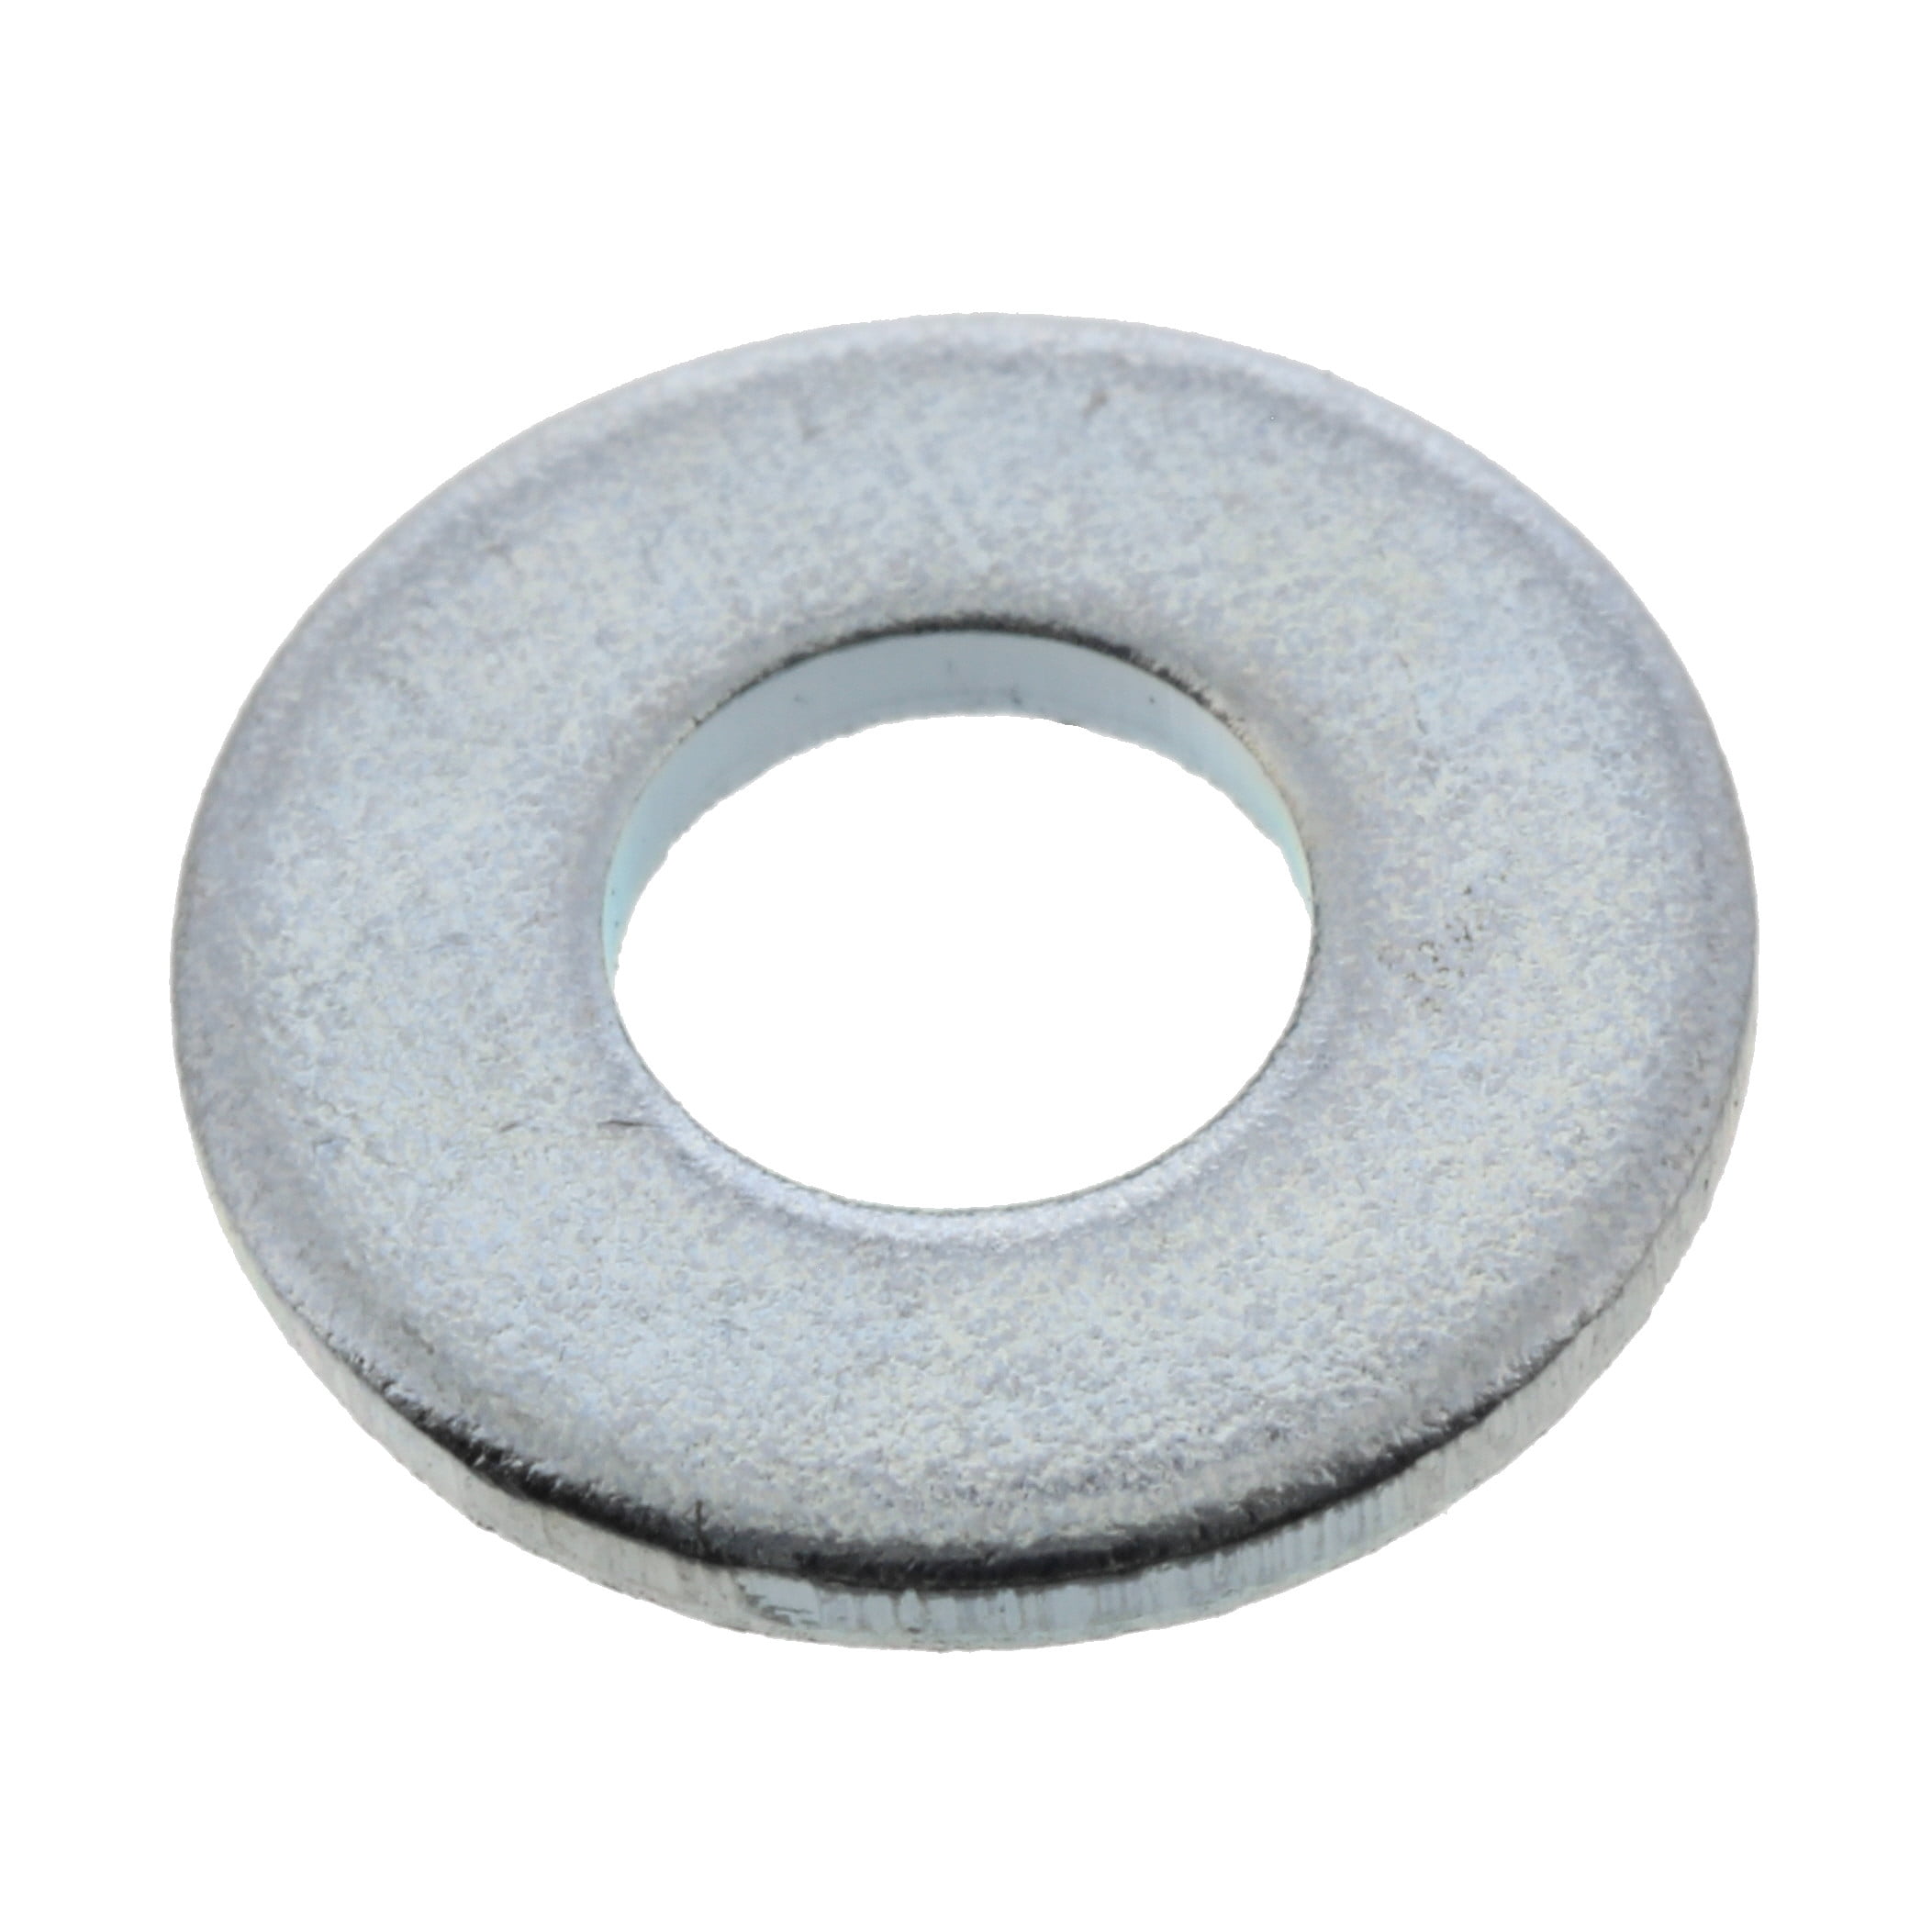 250 5/16x1-1/4 Fender Washers Stainless Steel 5/16 x 1-1/4" Large OD Washer 